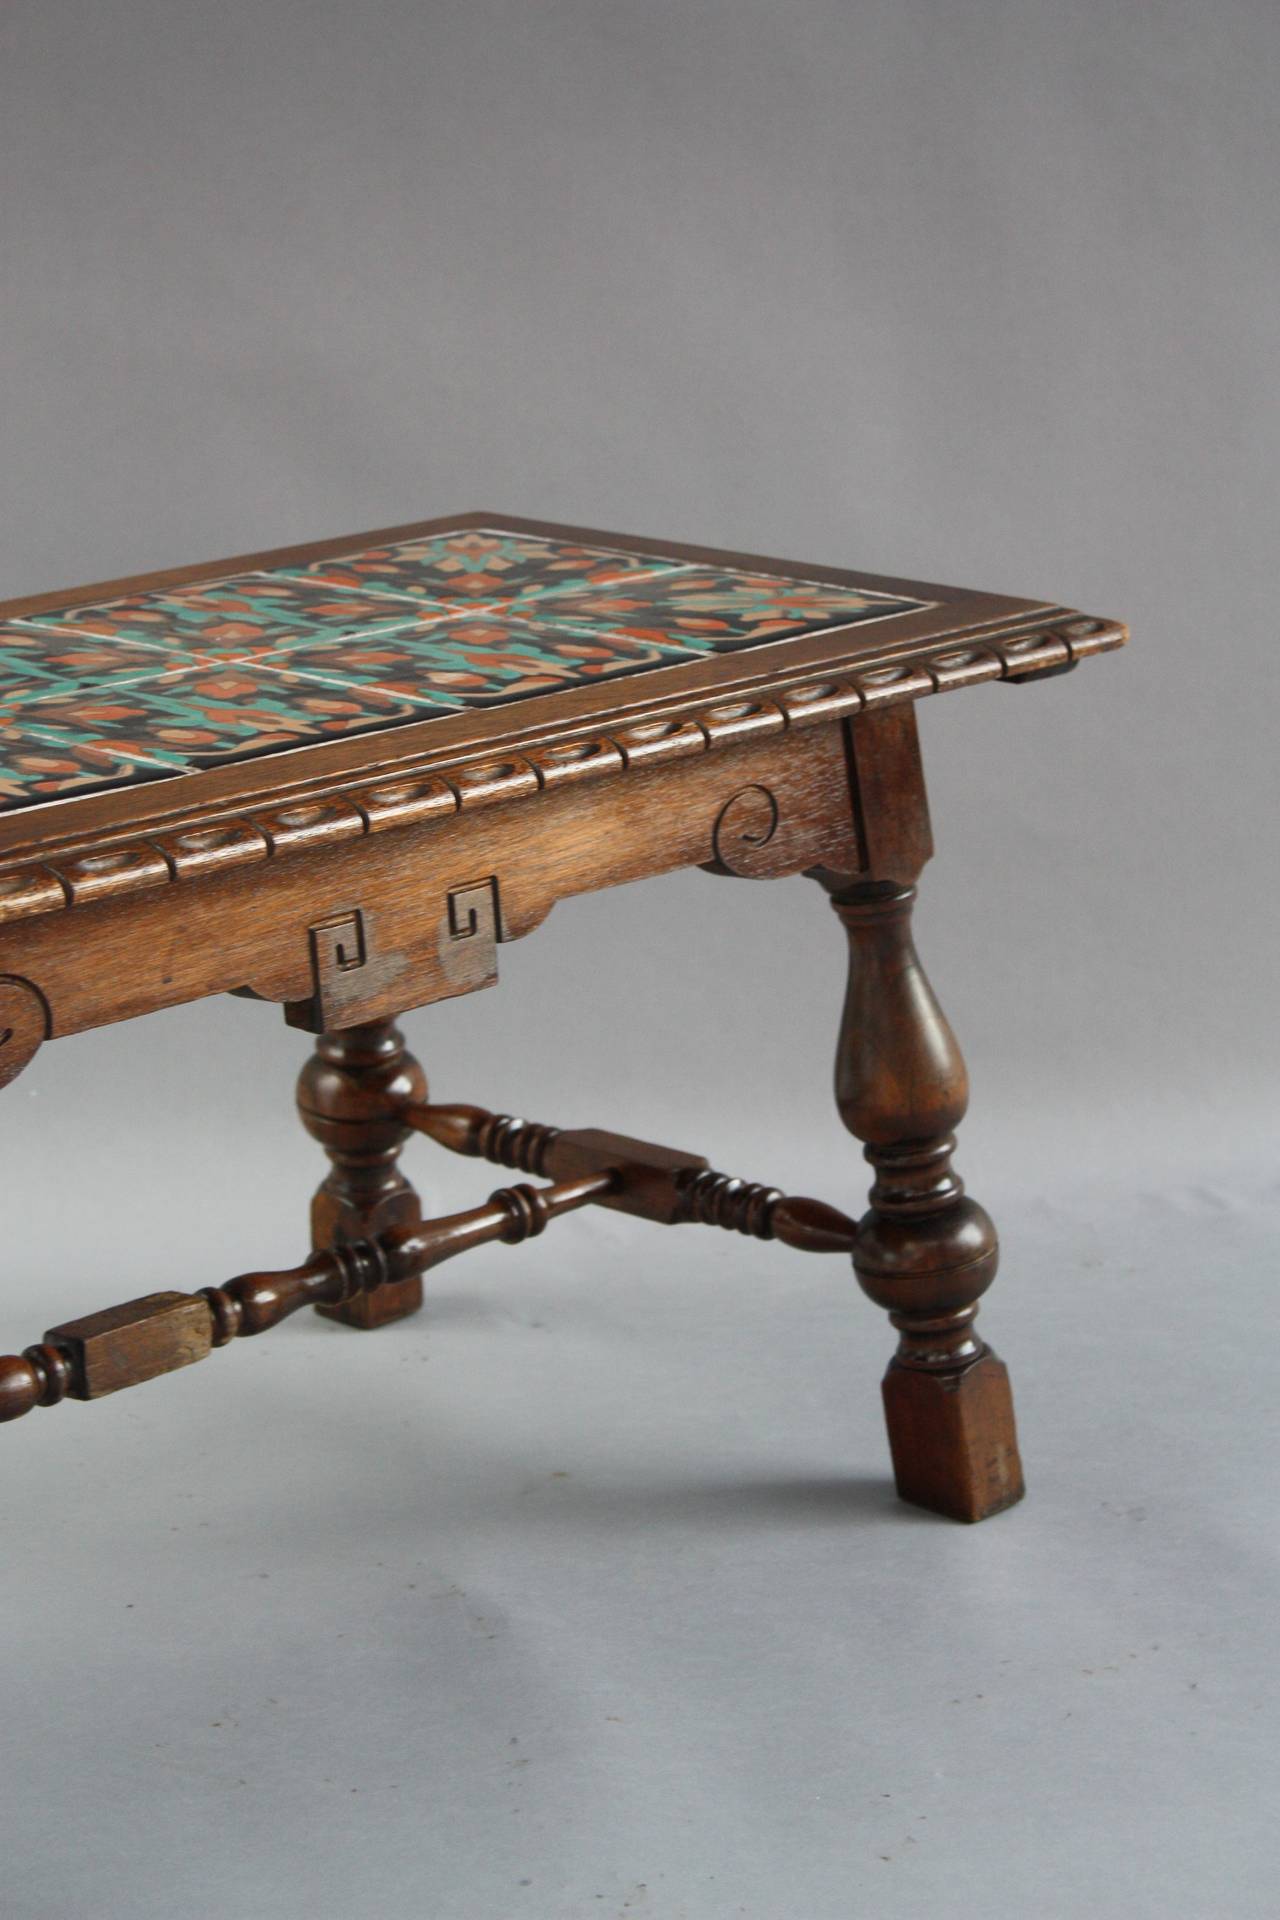 North American Antique California Tile Coffee Table